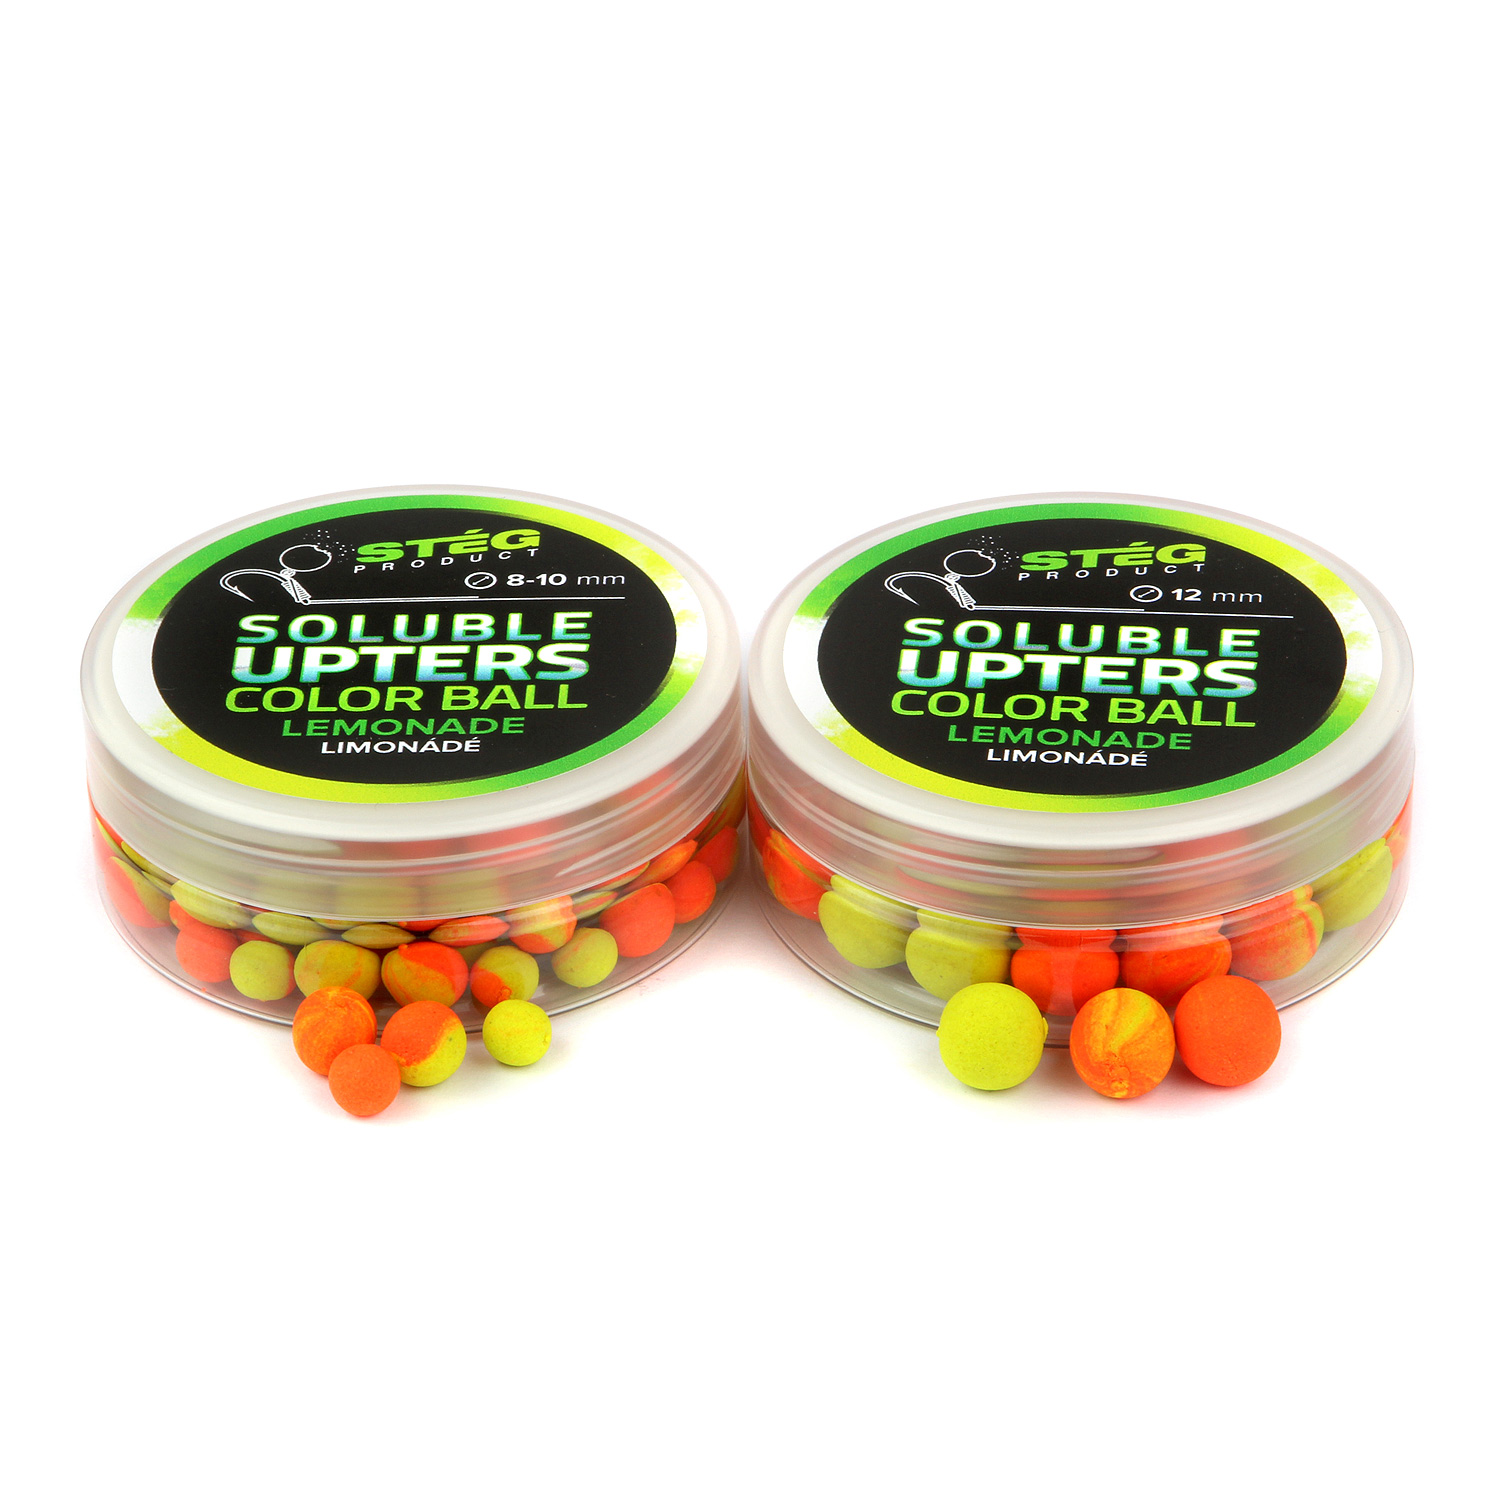 Stég Product Soluble Upters Color Ball 12mm Lemonade 30g